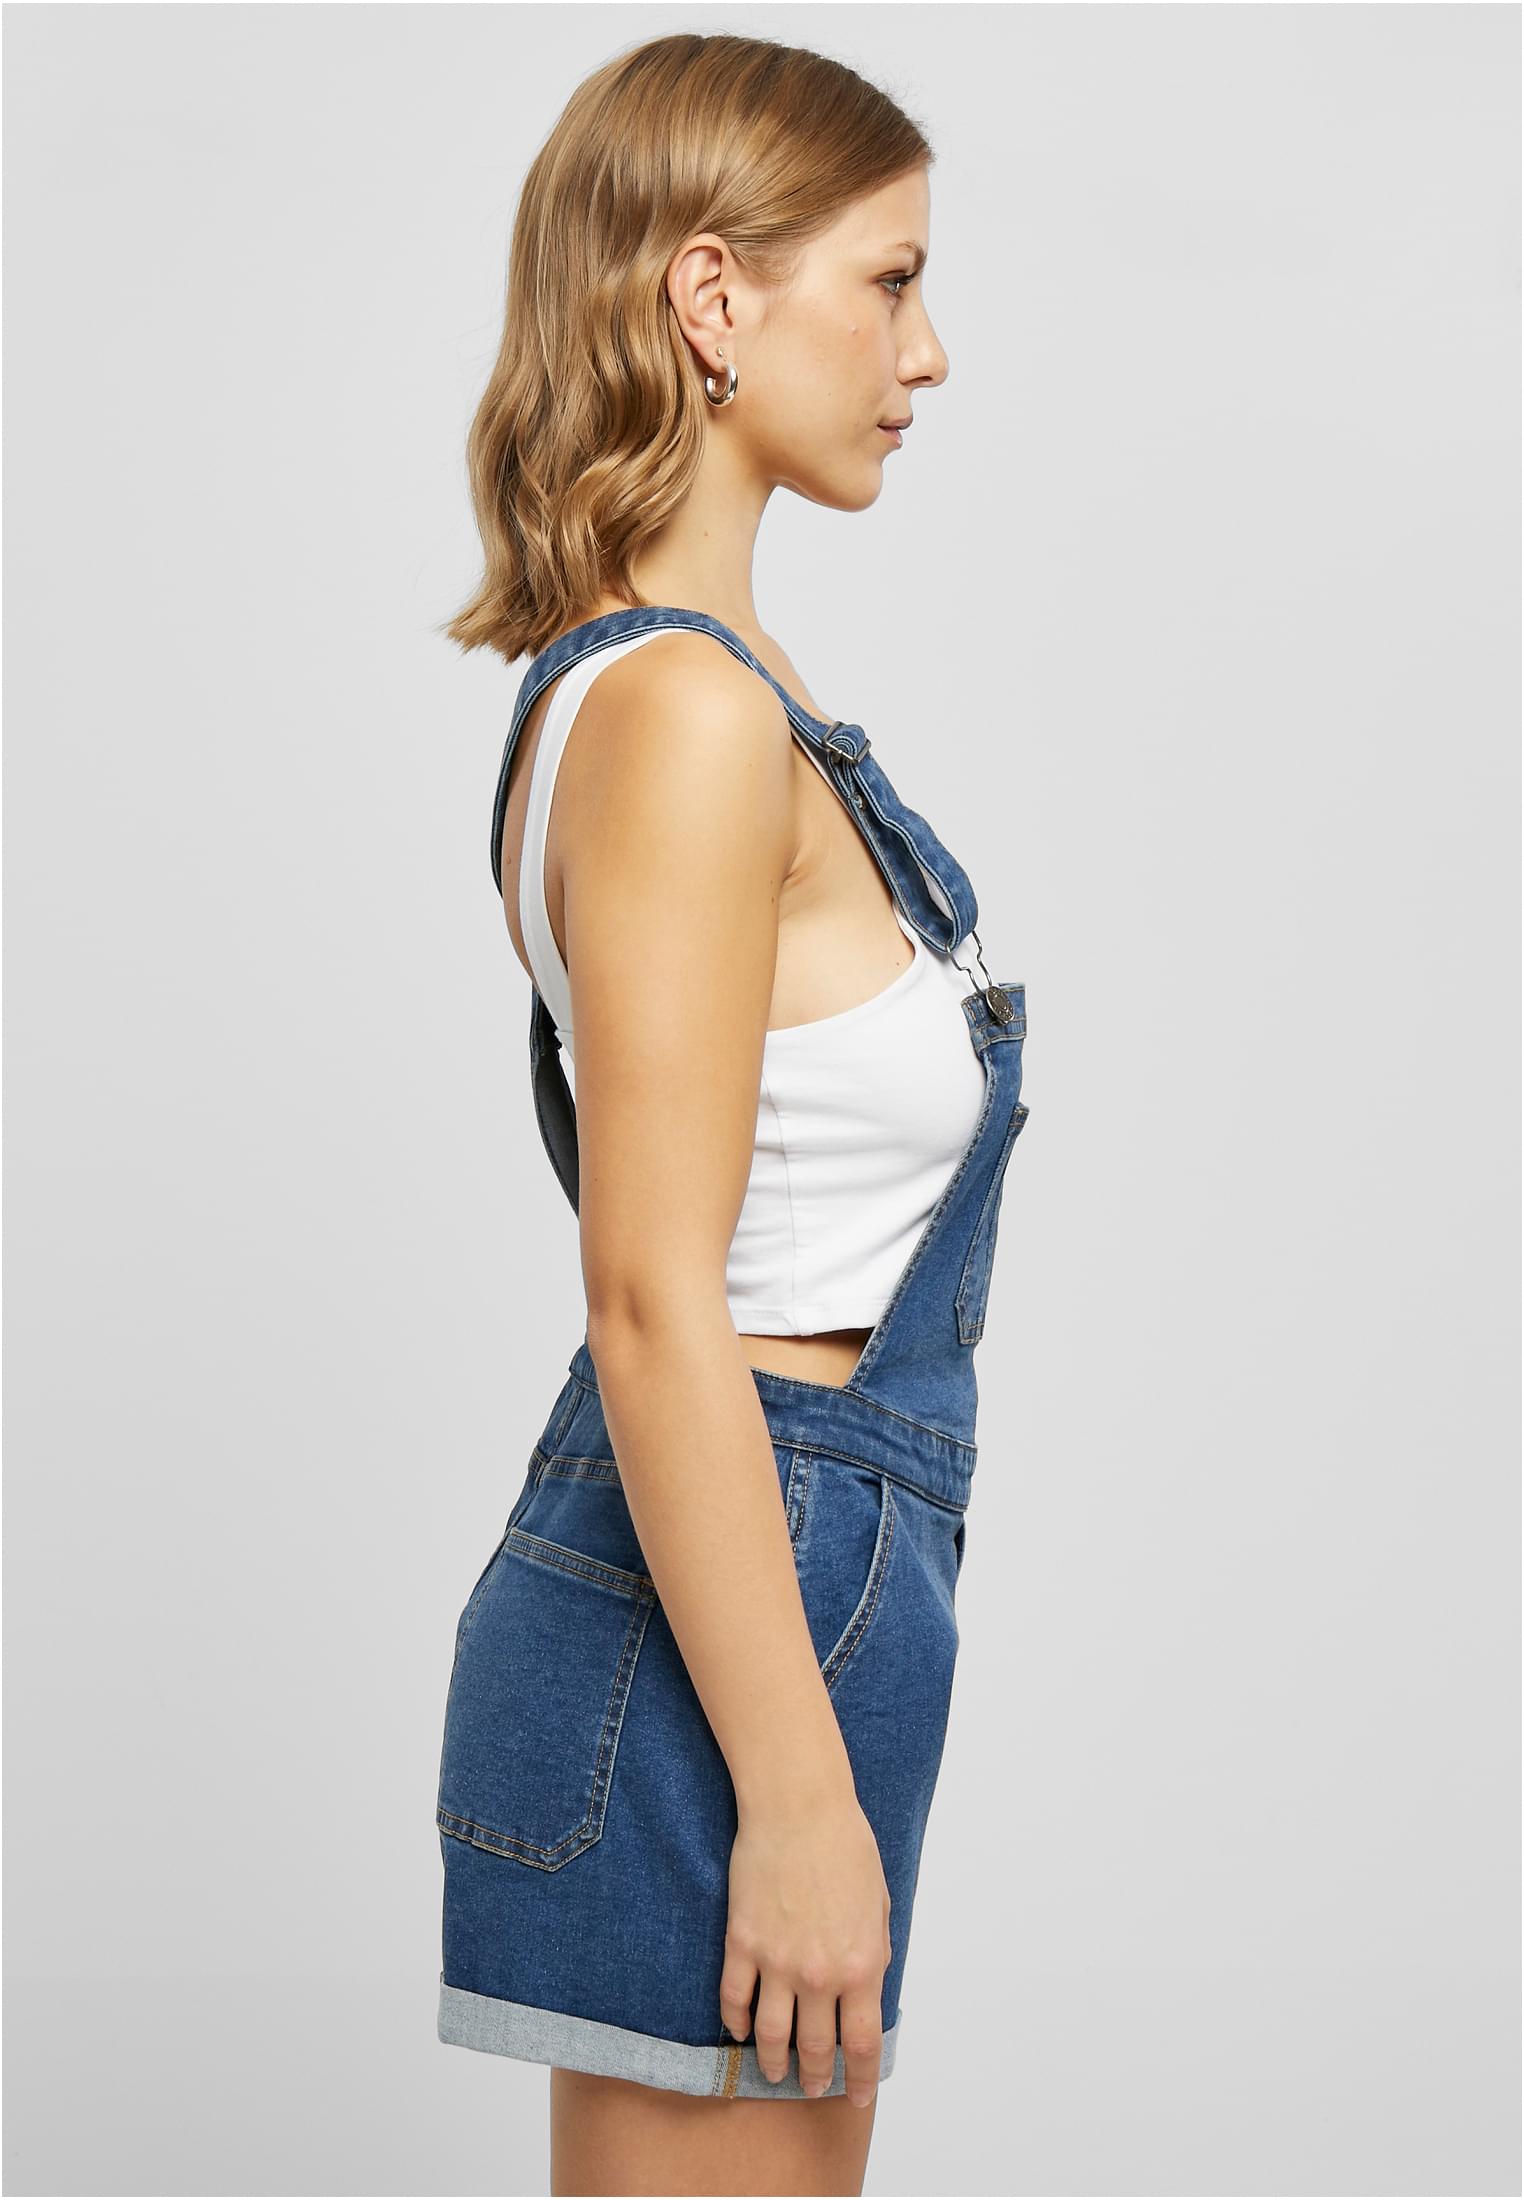 Street 9 Dungarees - Buy Street 9 Dungarees online in India